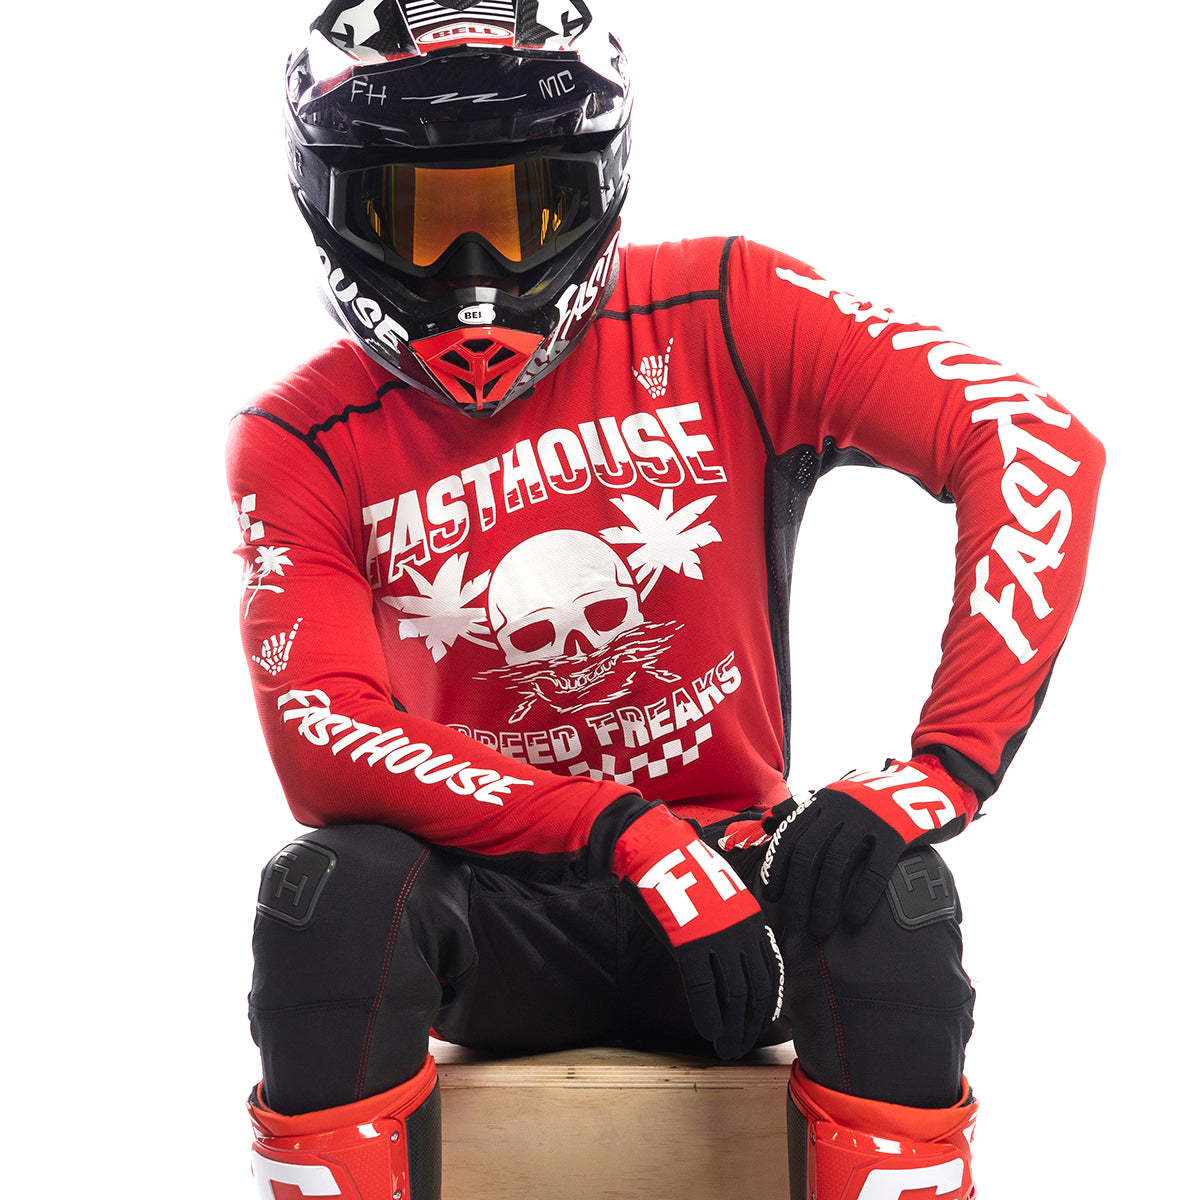 USA Grindhouse Subside Jersey -  Red